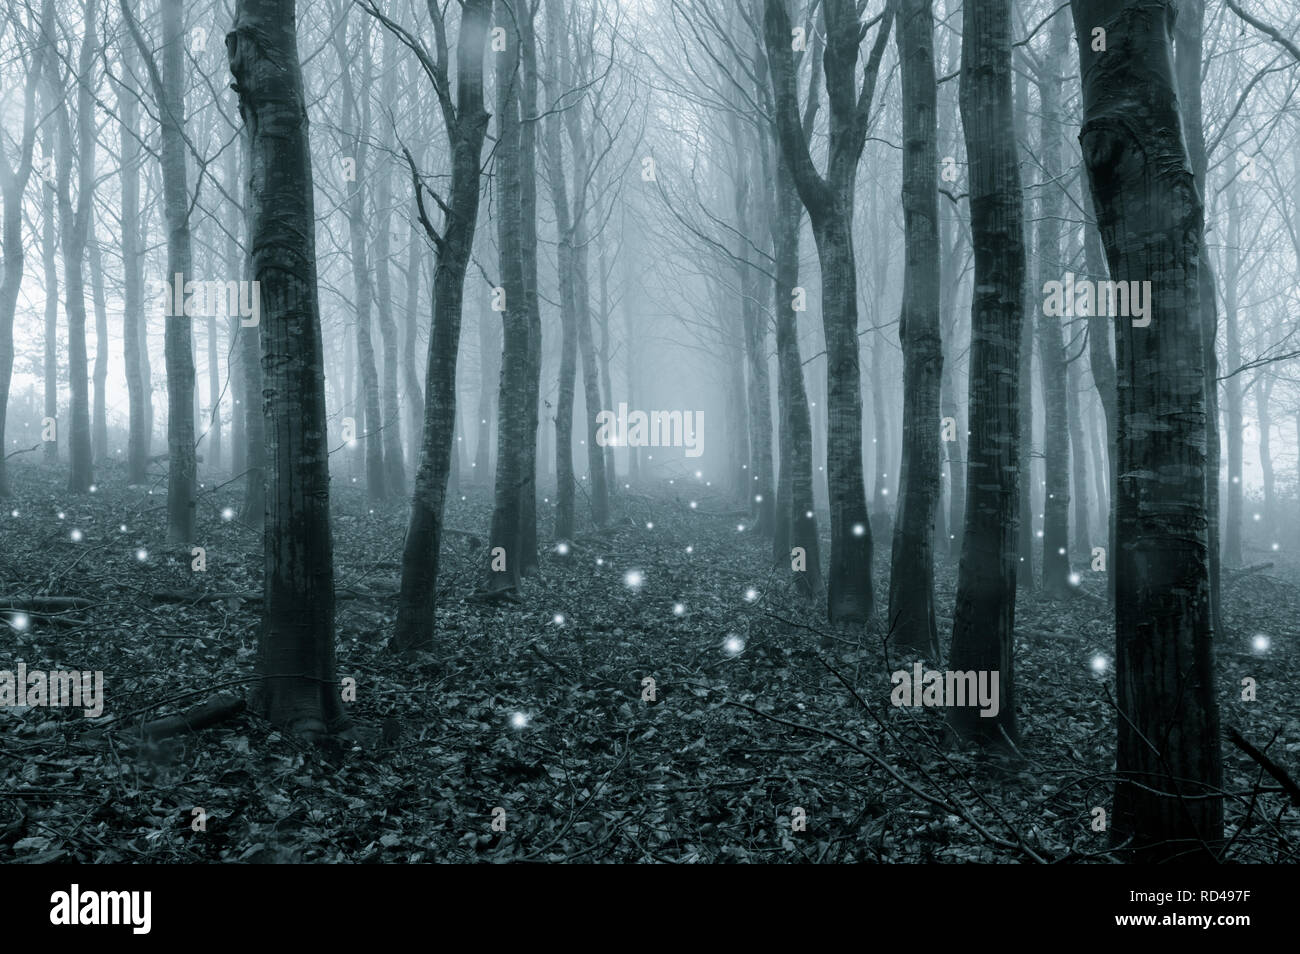 Glowing ghostly lights floating in a foggy, winter forest. With a cold blue edit. Stock Photo